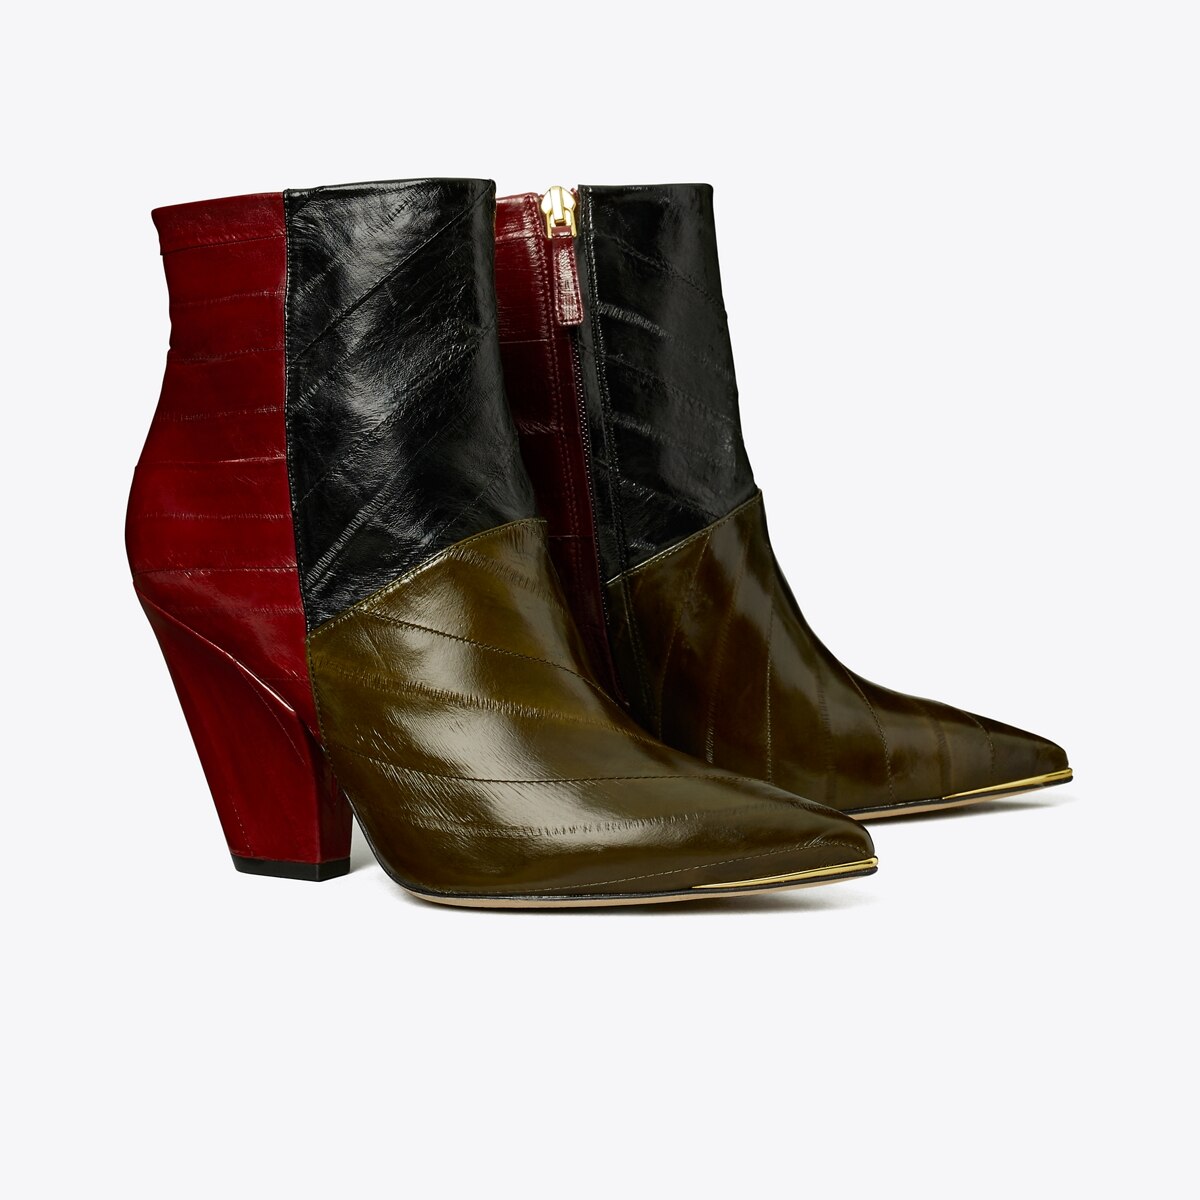 Lila Eel Zip-Up Ankle Boot: Women's Designer Ankle Boots | Tory Burch